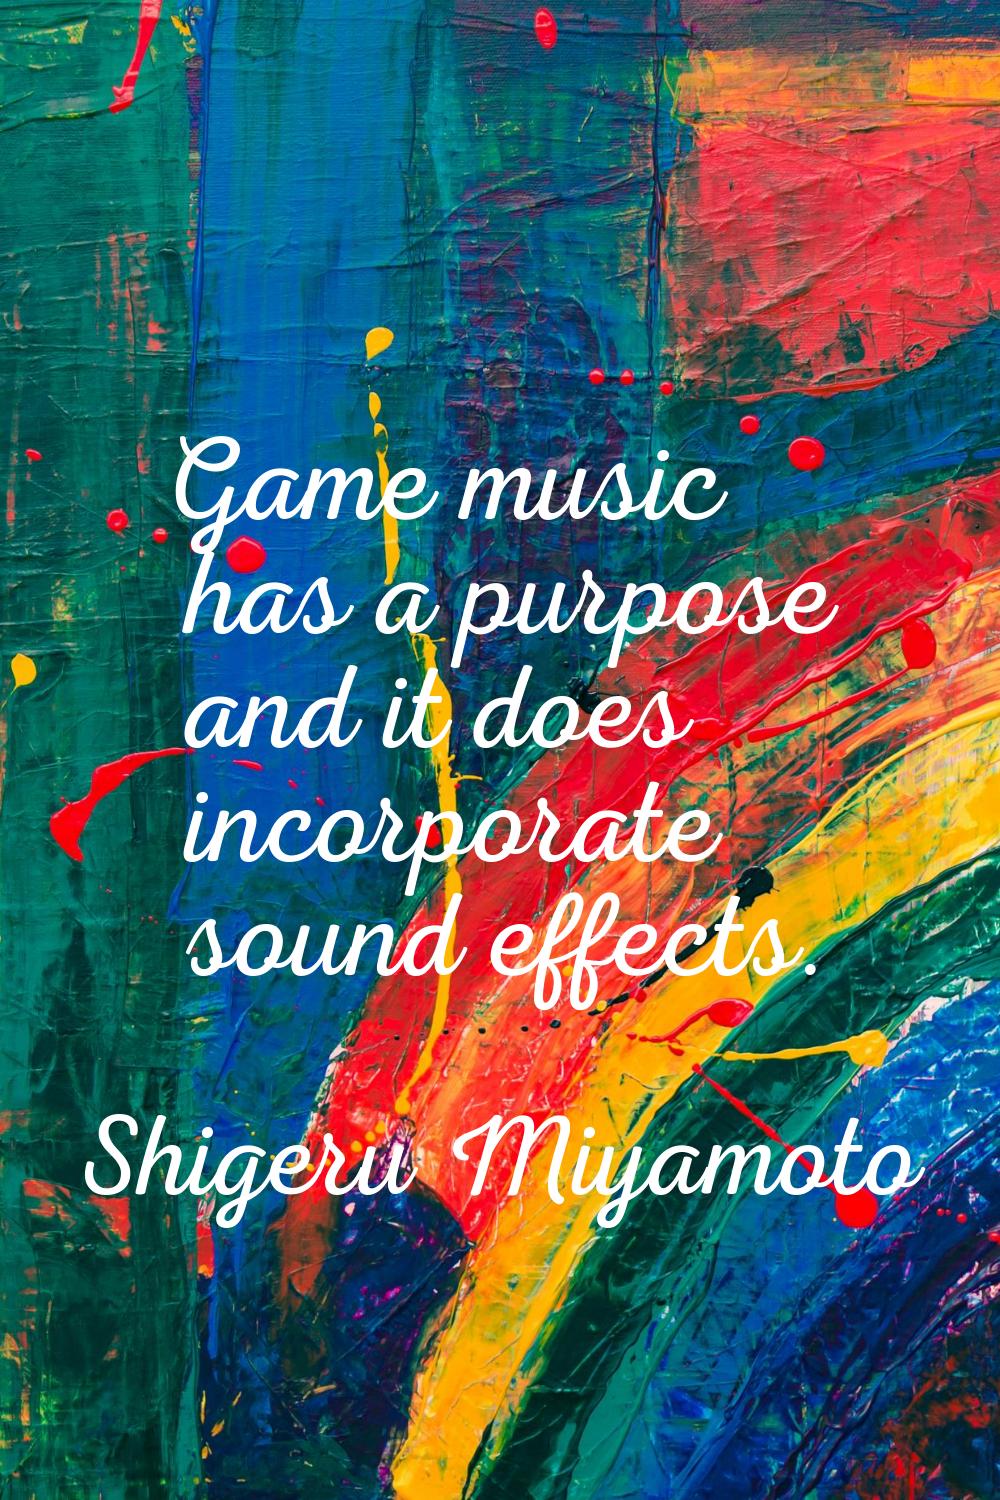 Game music has a purpose and it does incorporate sound effects.